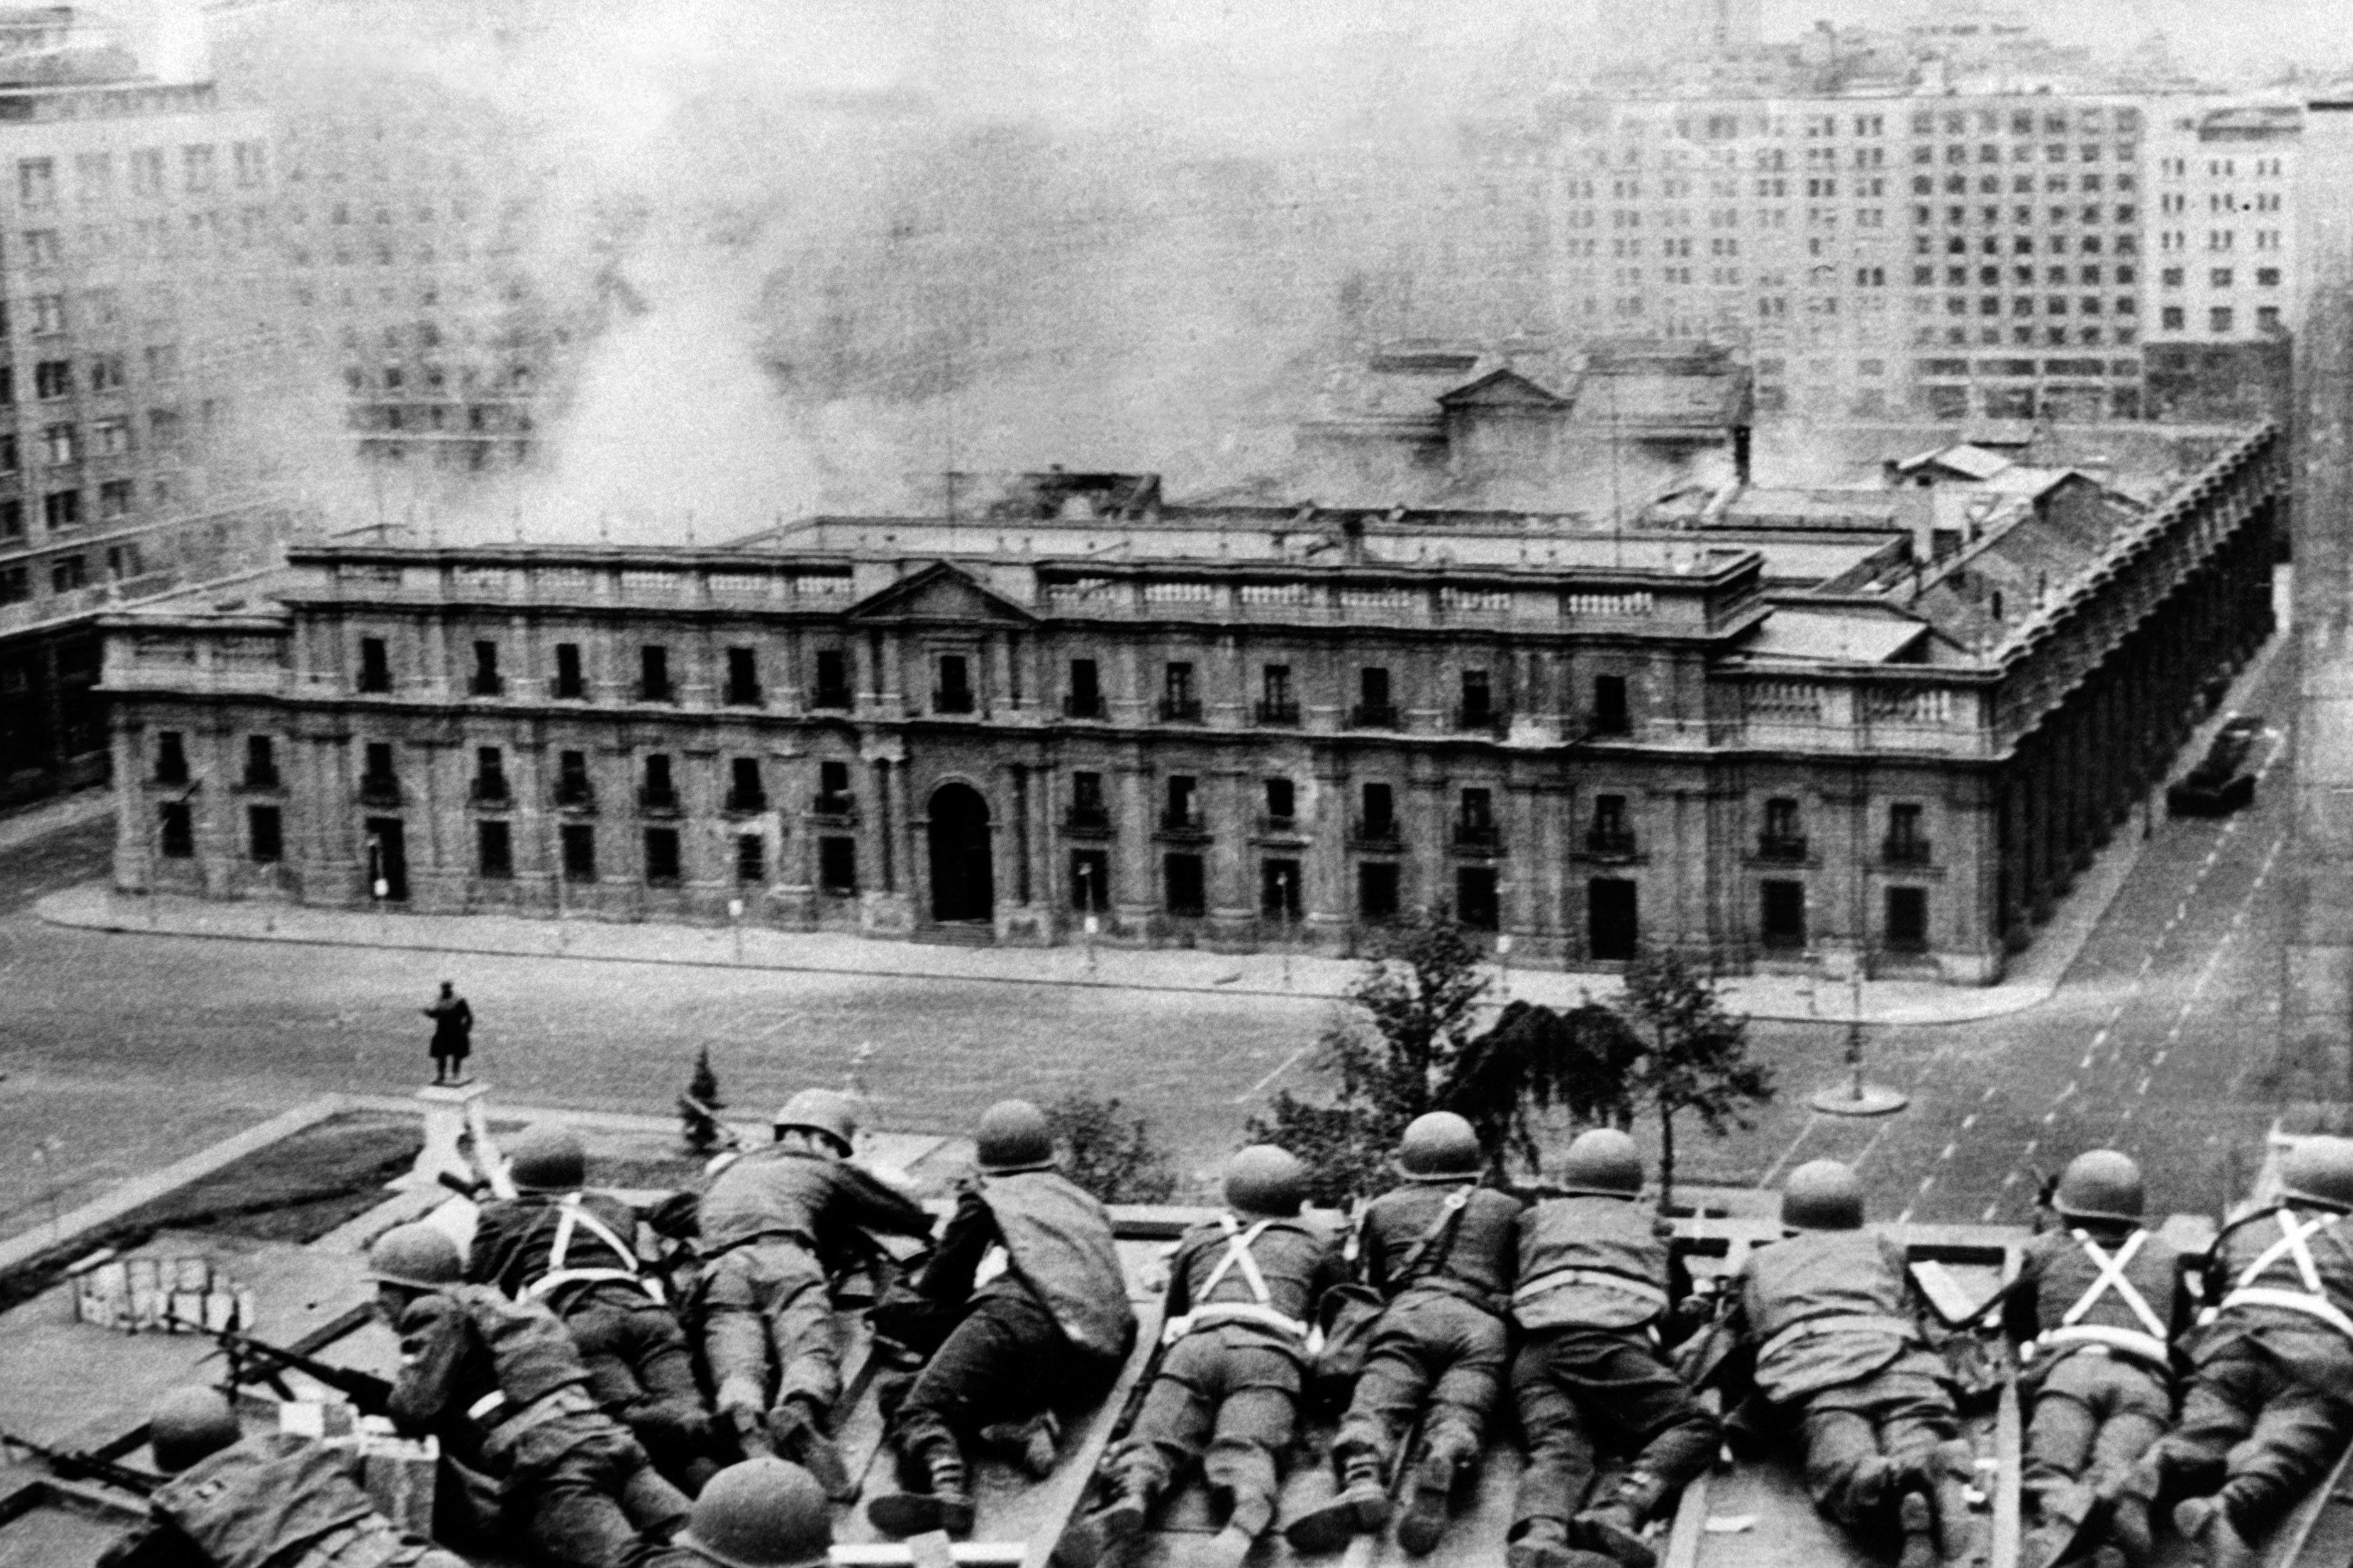 A black and white photo shows soldiers lying on their stomaches while aiming weapons at Chile's  Moneda palace, which has smoke coming out, after a coup on Sept. 11, 1973